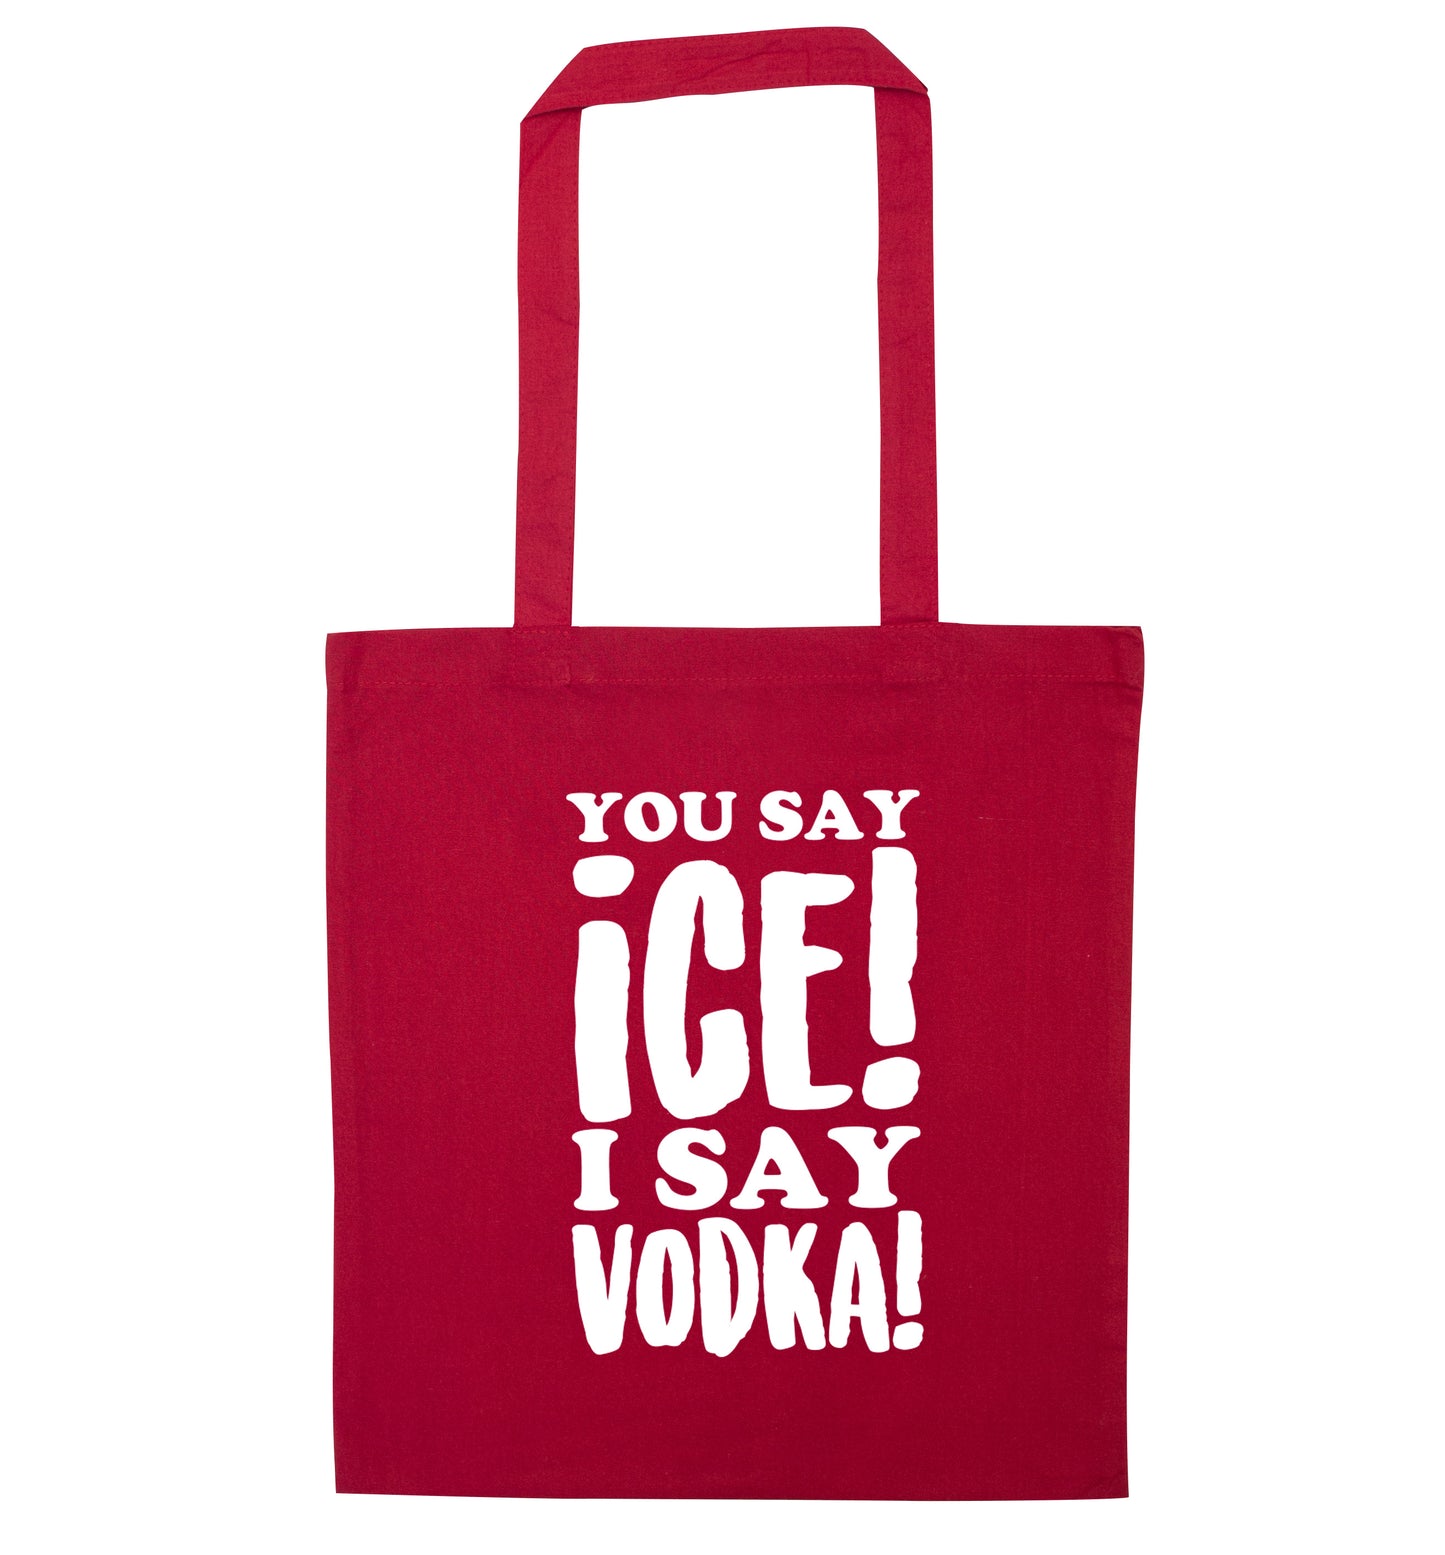 You say ice I say vodka! red tote bag